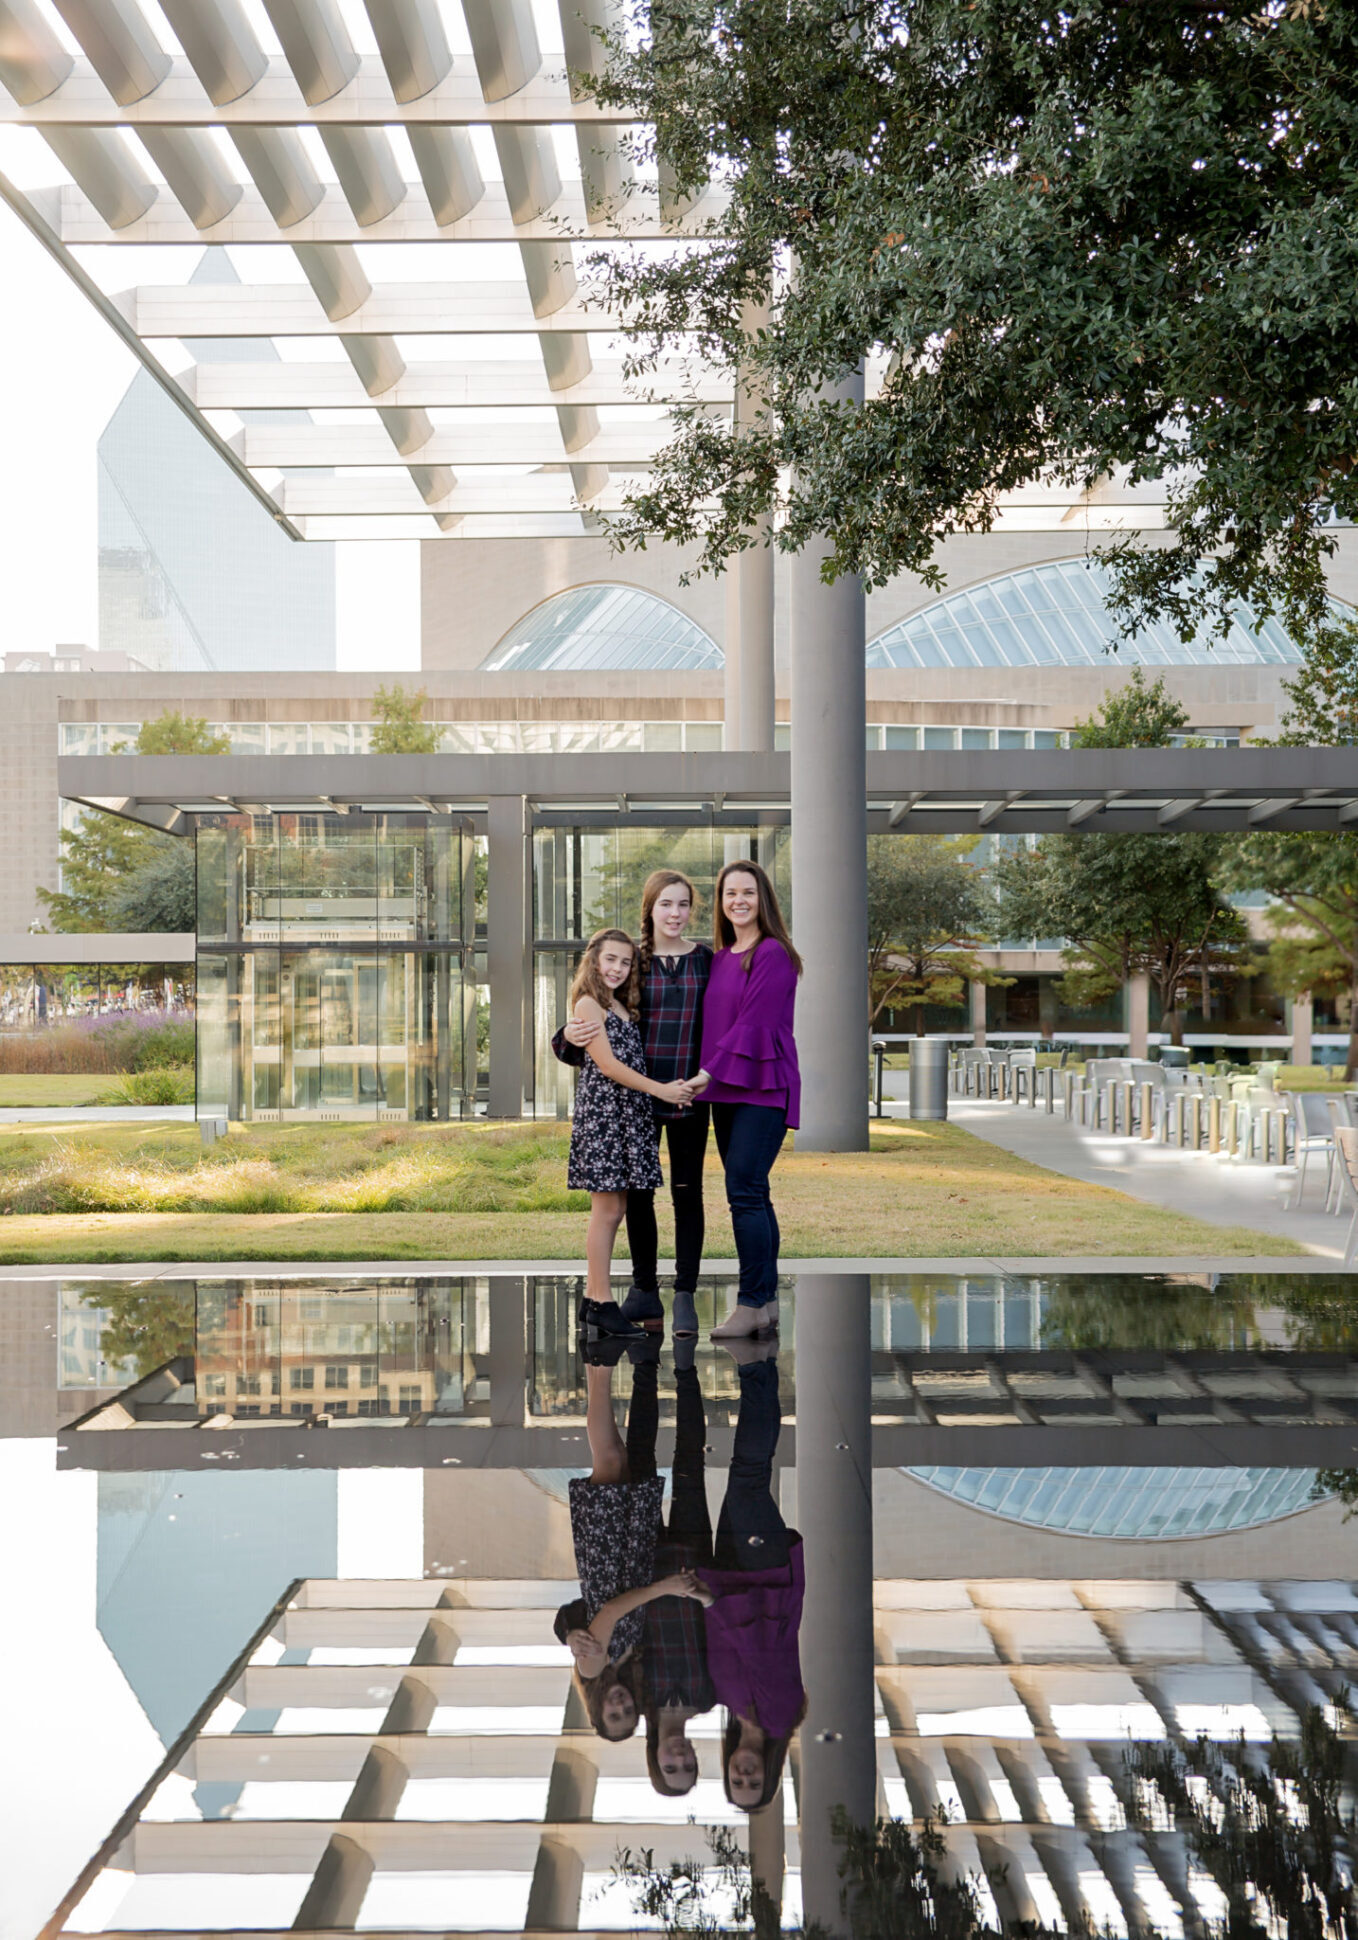 Dallas family photographer shares portrait of family outside the ATT performing arts center in downtown Dallas